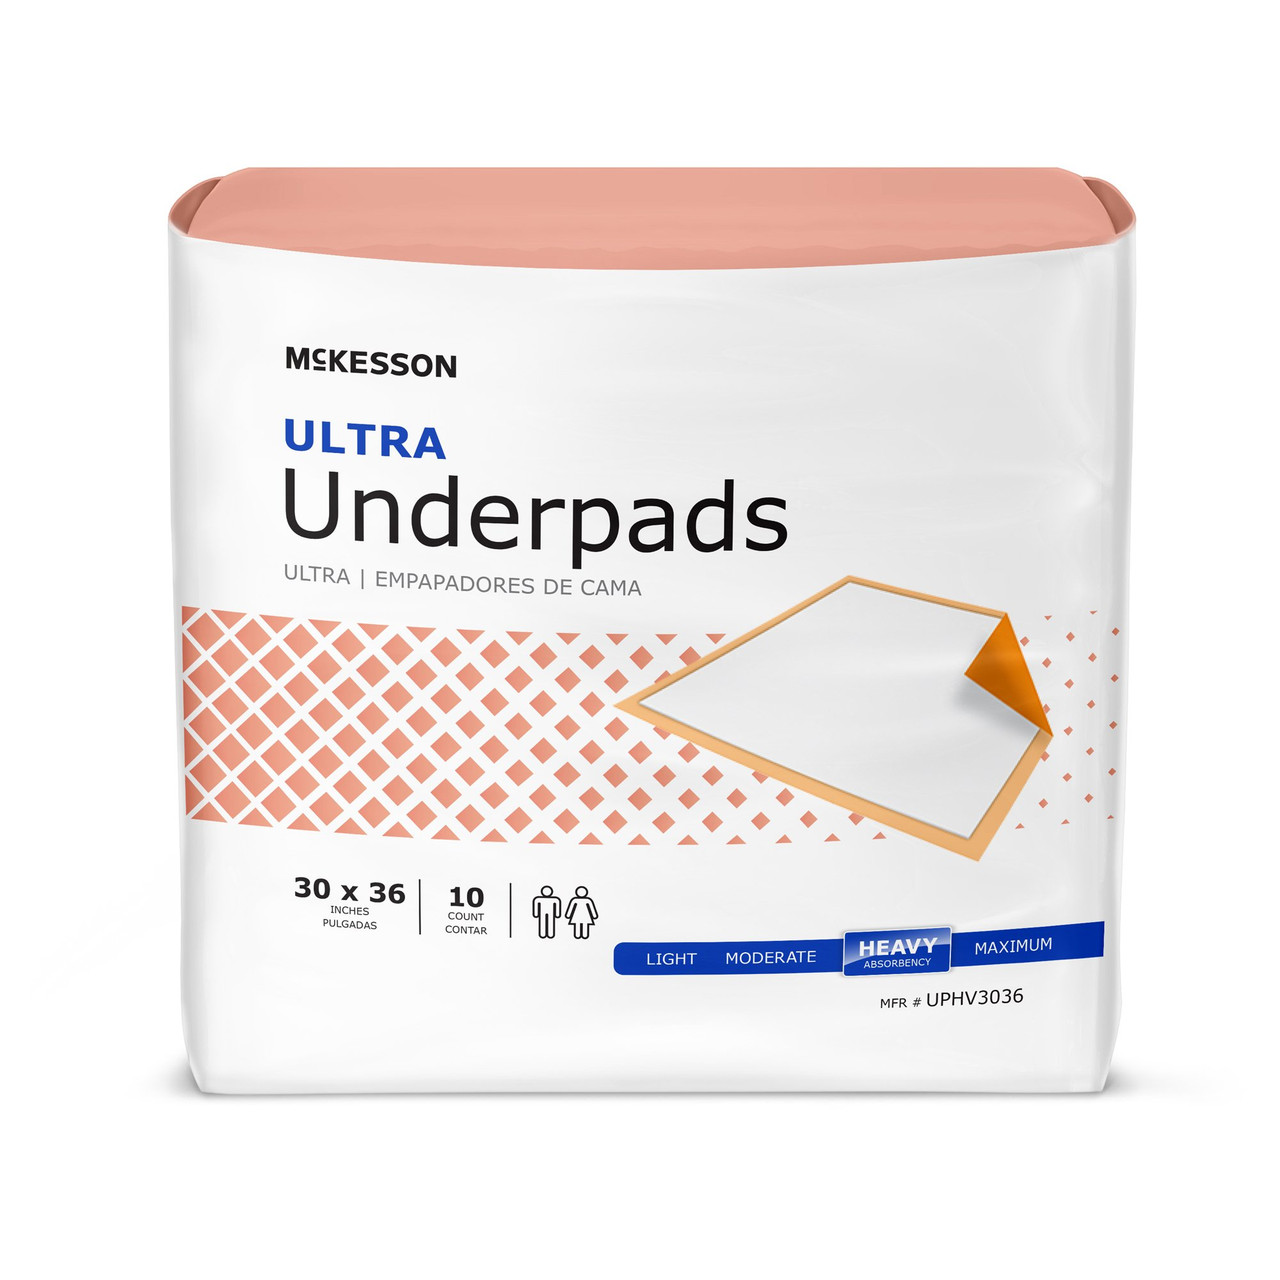 Large Disposable Incontinence Bed Pad 23 x 36 Inch (20 Count